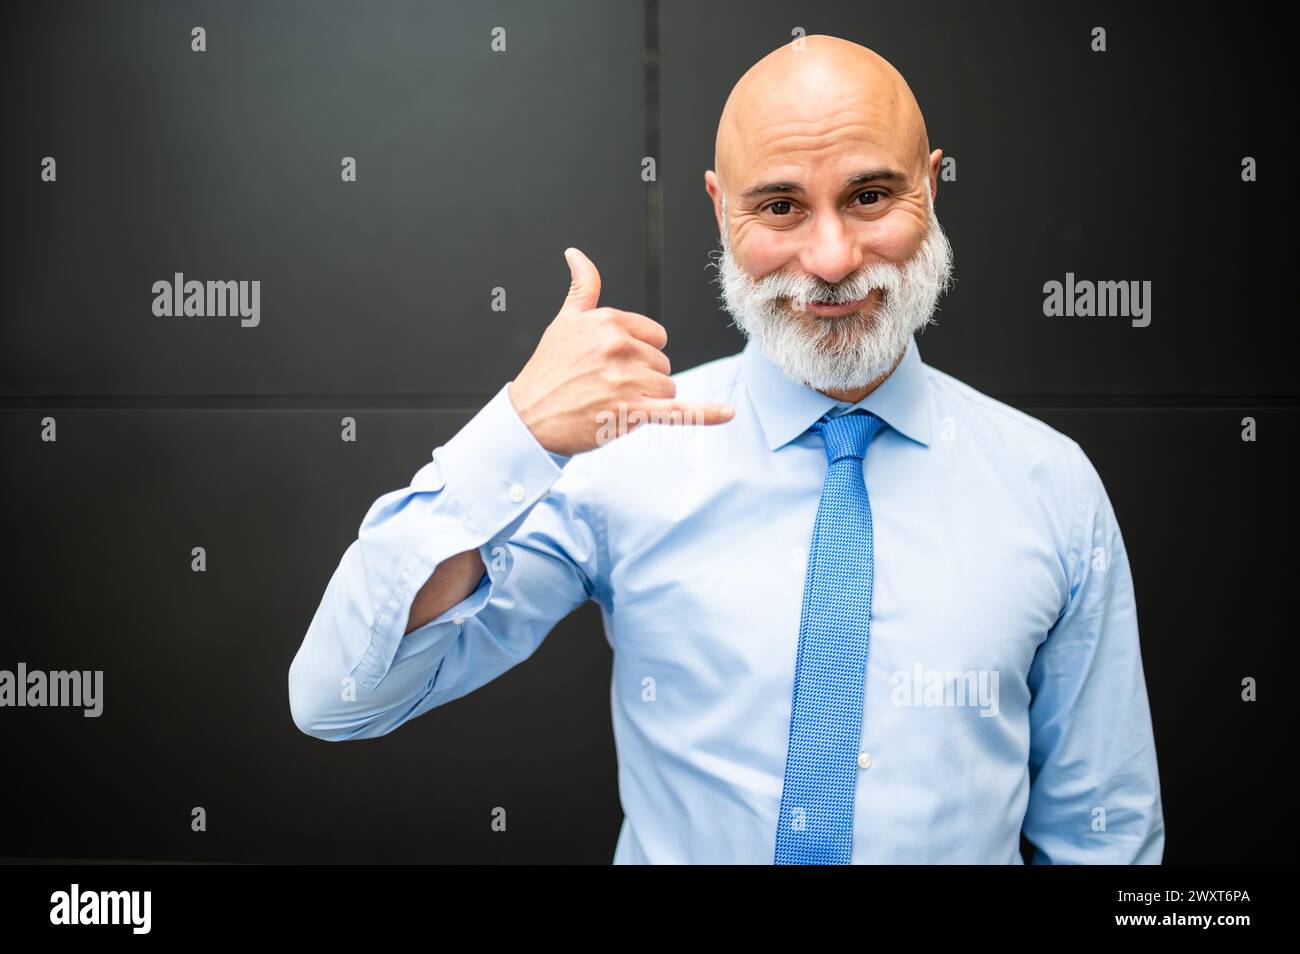 Mature bald stylish business man portrait with a white beard outdoor doing the call sign with his hand Stock Photo